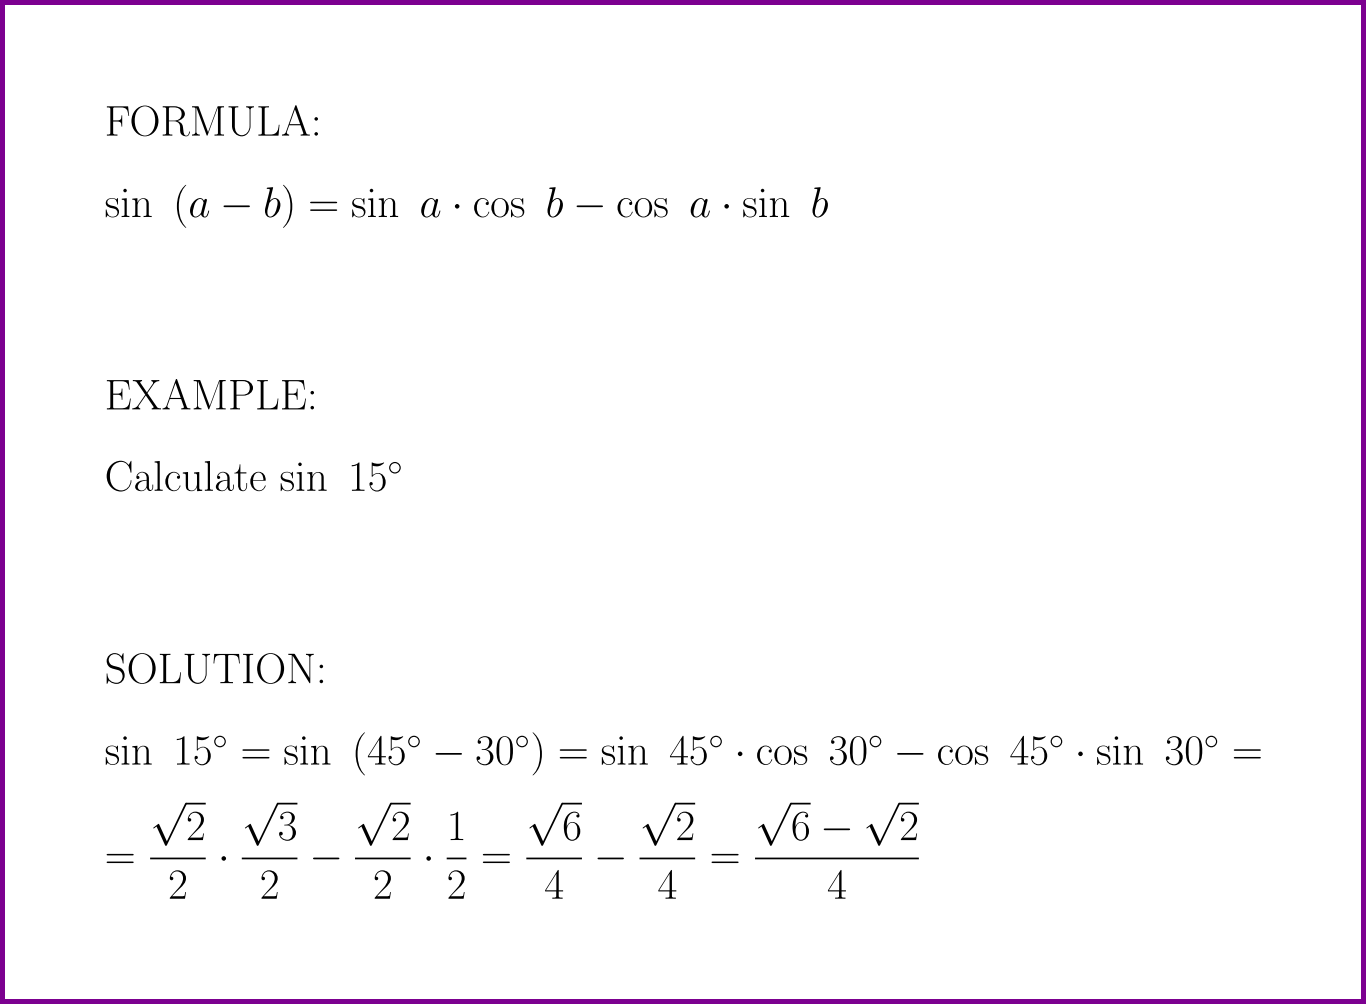 sin (a – b) = ? (formula with example) [sine of difference